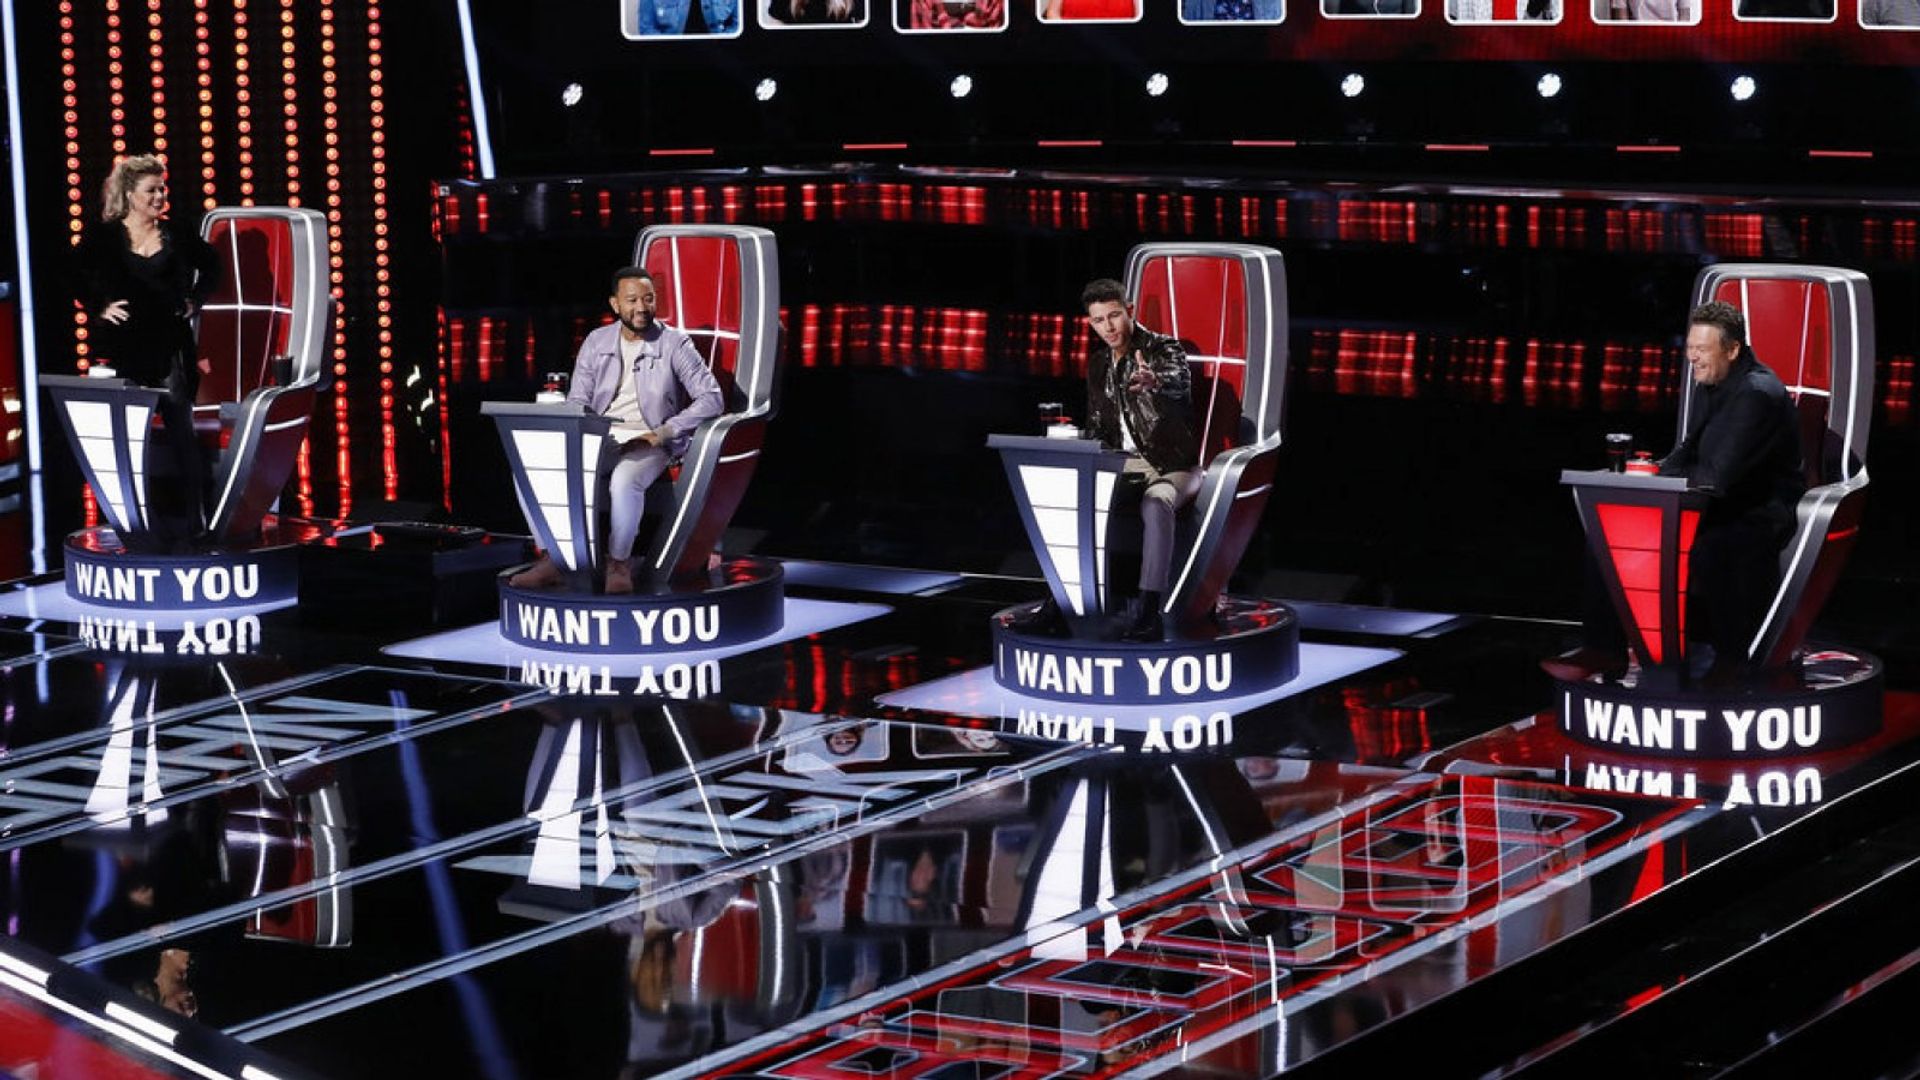 The Voice background